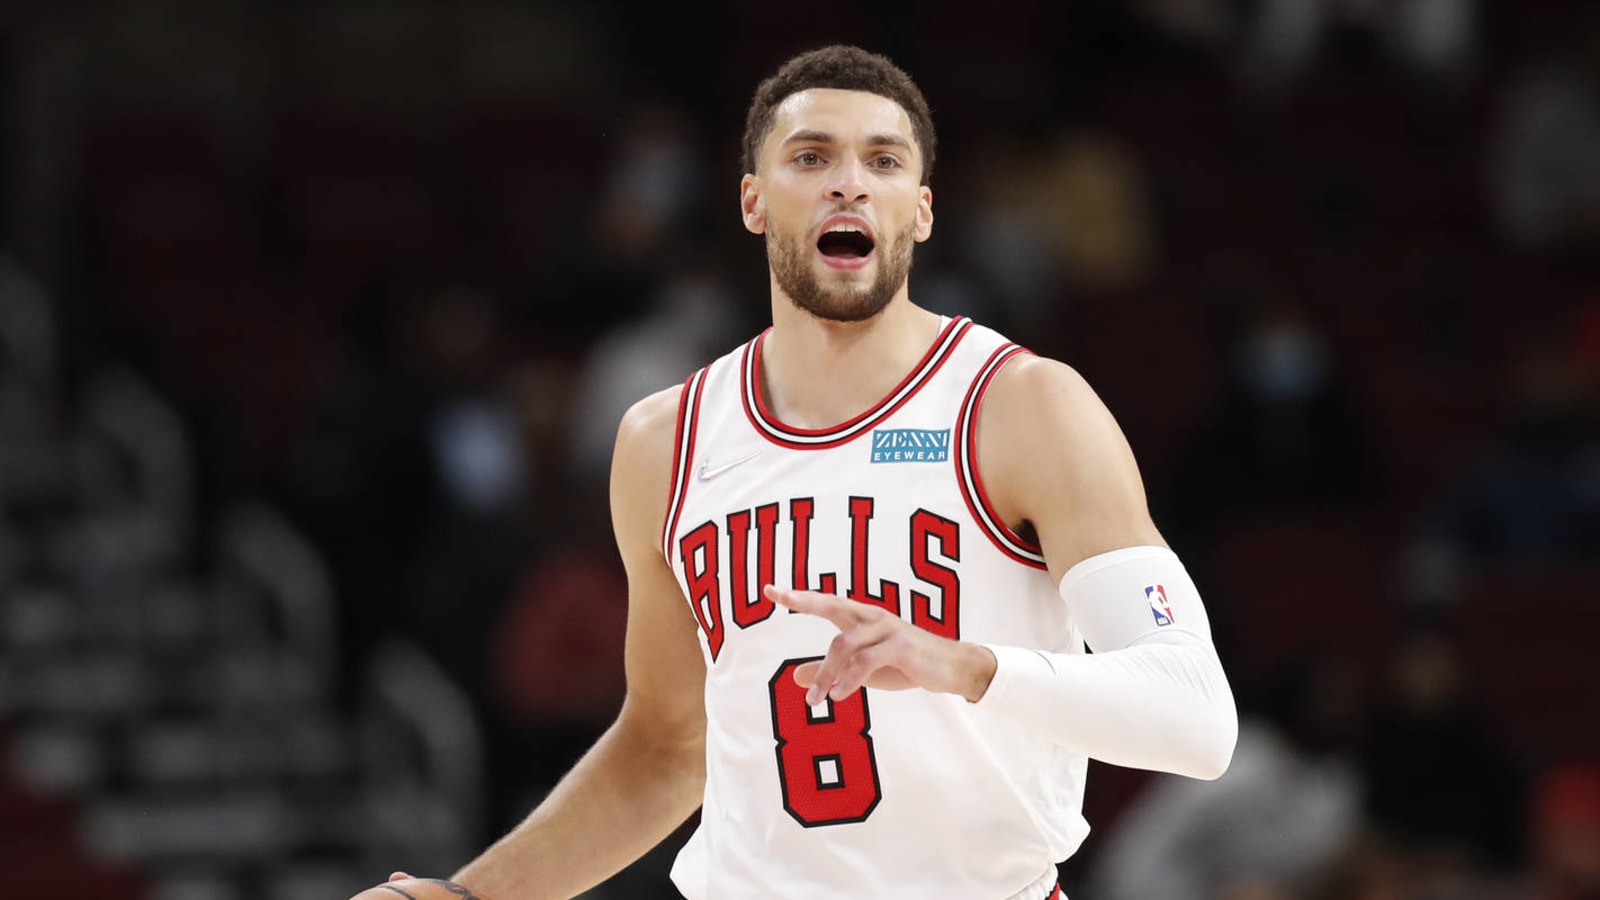 Now's the time for Zach LaVine to grab the Bulls by the horns